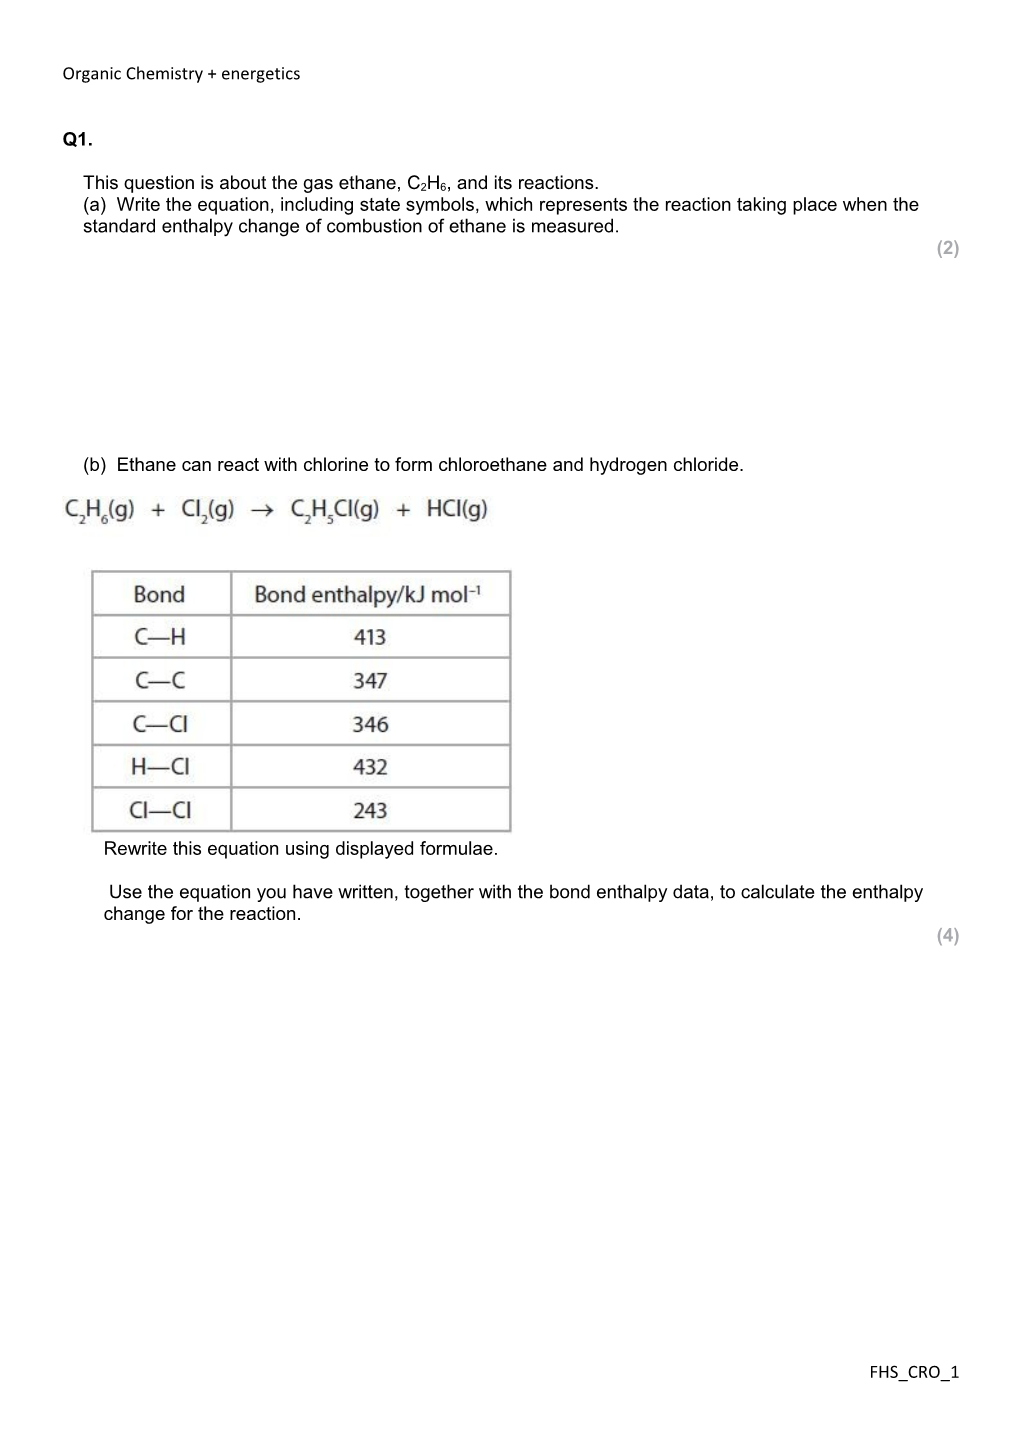 This Question Is About the Gas Ethane, C2H6, and Its Reactions